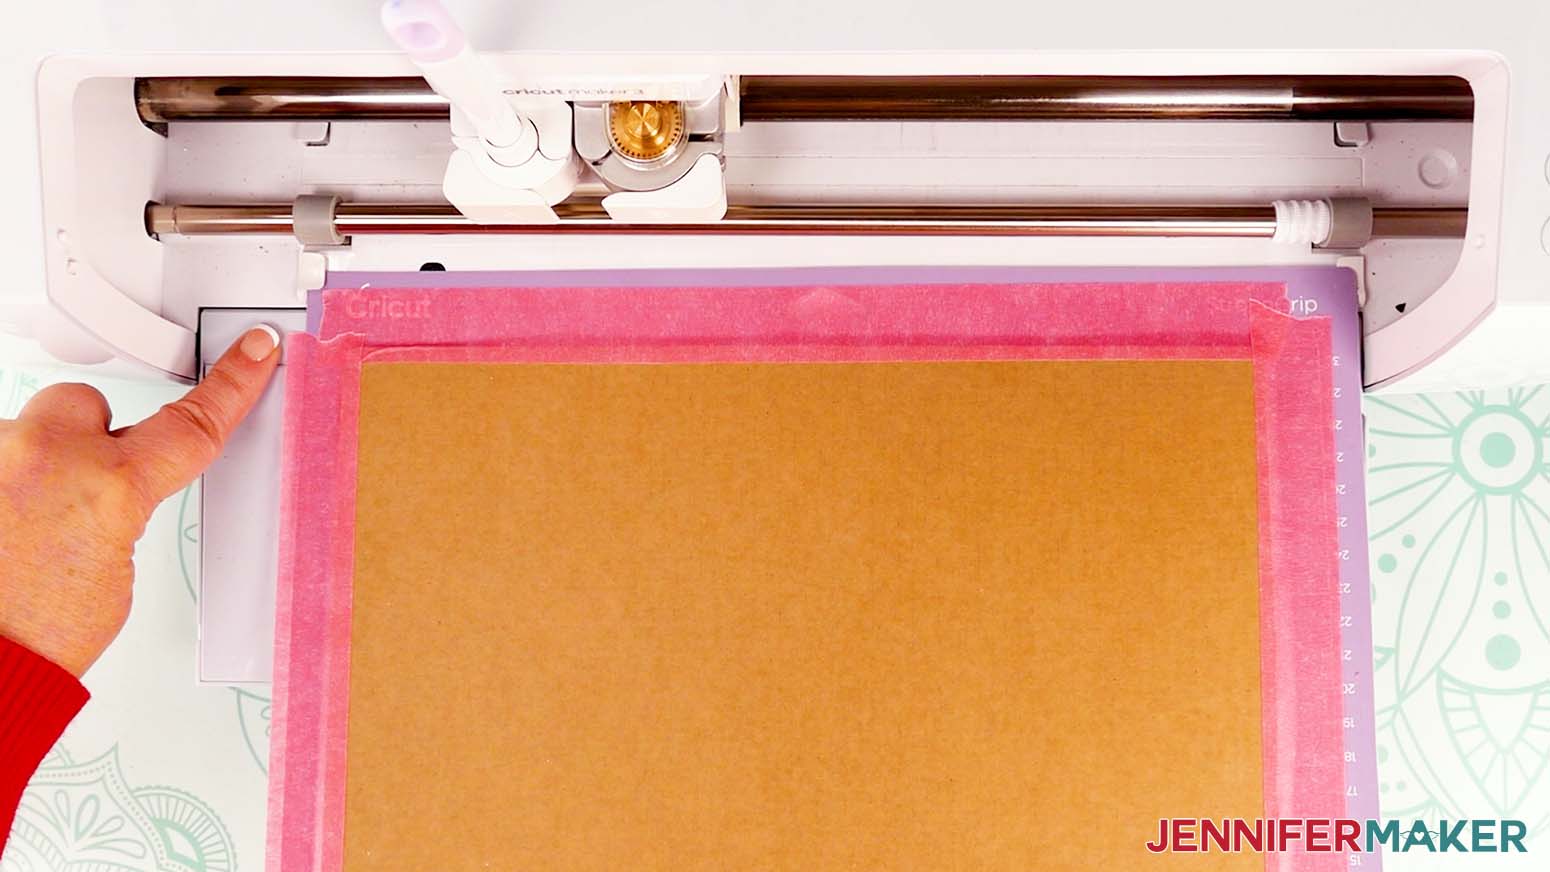 Remove any excess painter's tape that extends past the left side of the machine mat before cutting your cardboard jumping box base piece